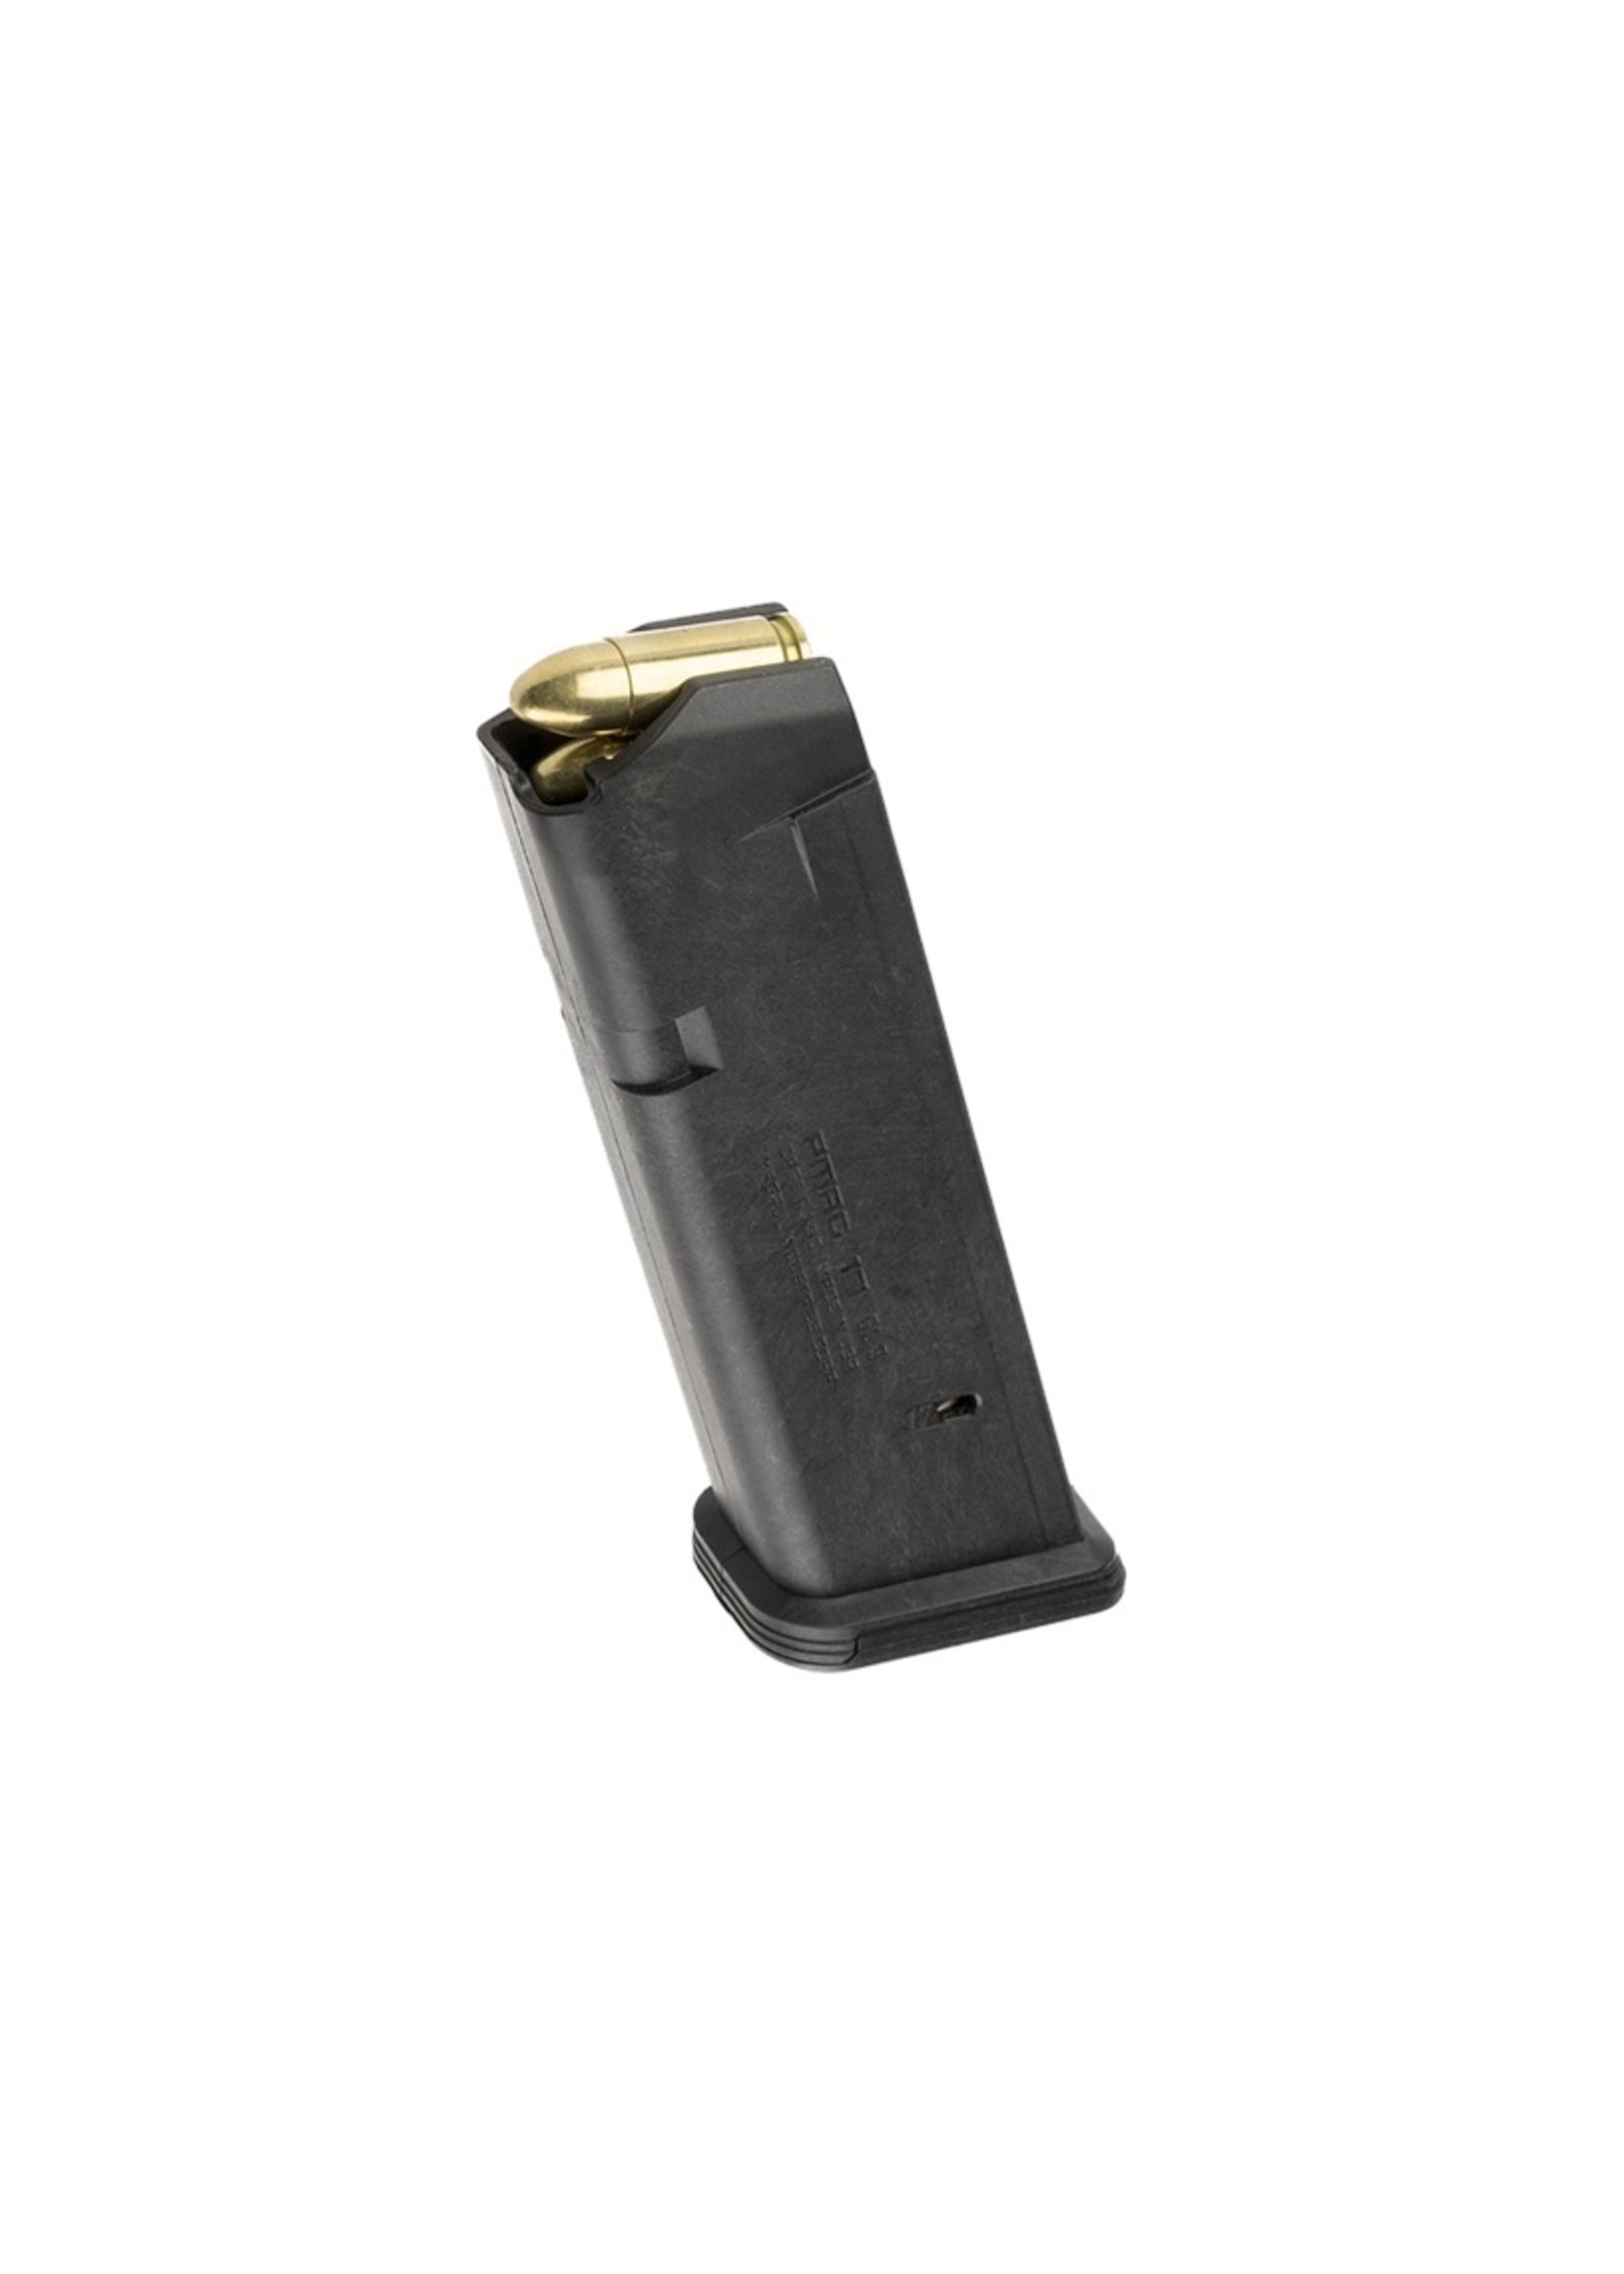 MAGPUL PMAG 17 GL9 – GLOCK G17 (PINNED TO 10)